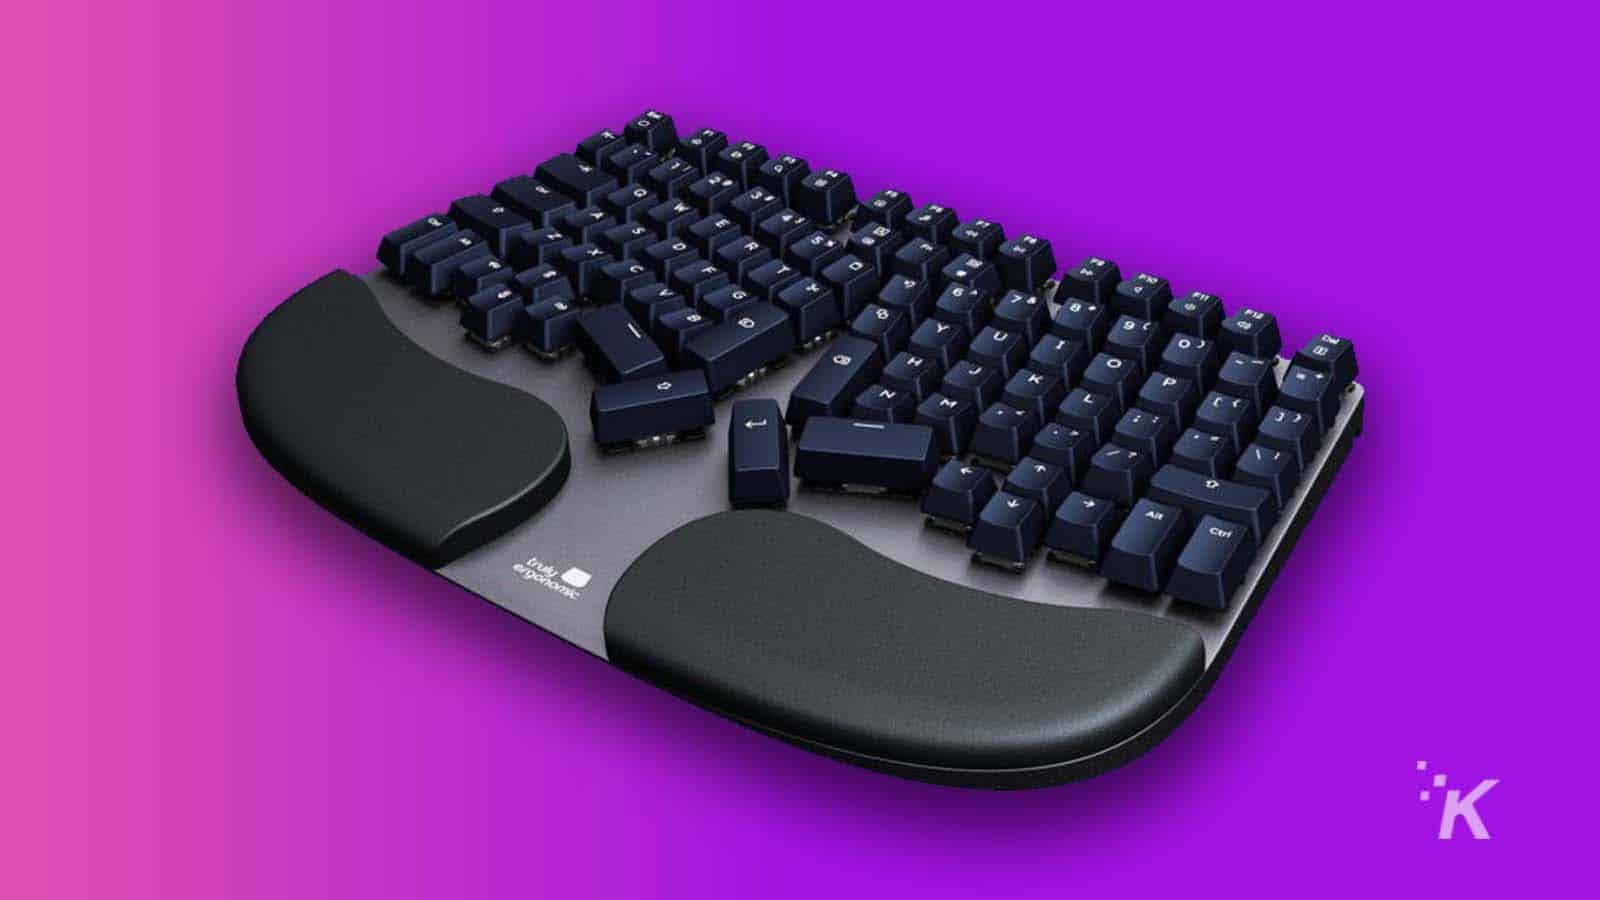 cleave keyboard on purple background